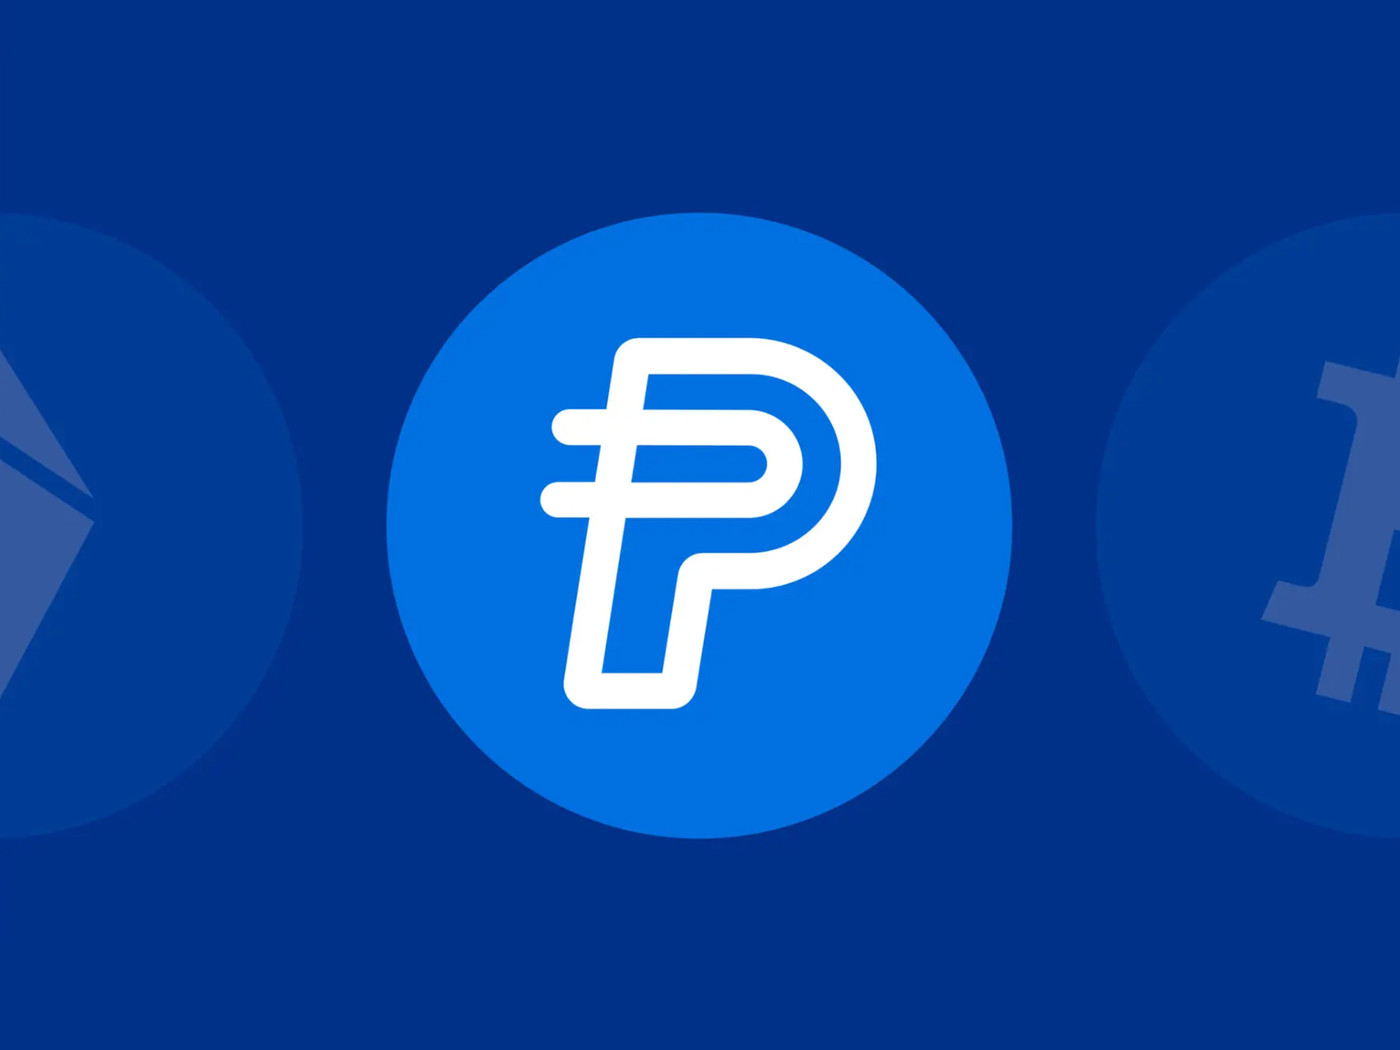 PayPal launches stablecoin tied to the US dollar, issued on Ethereum